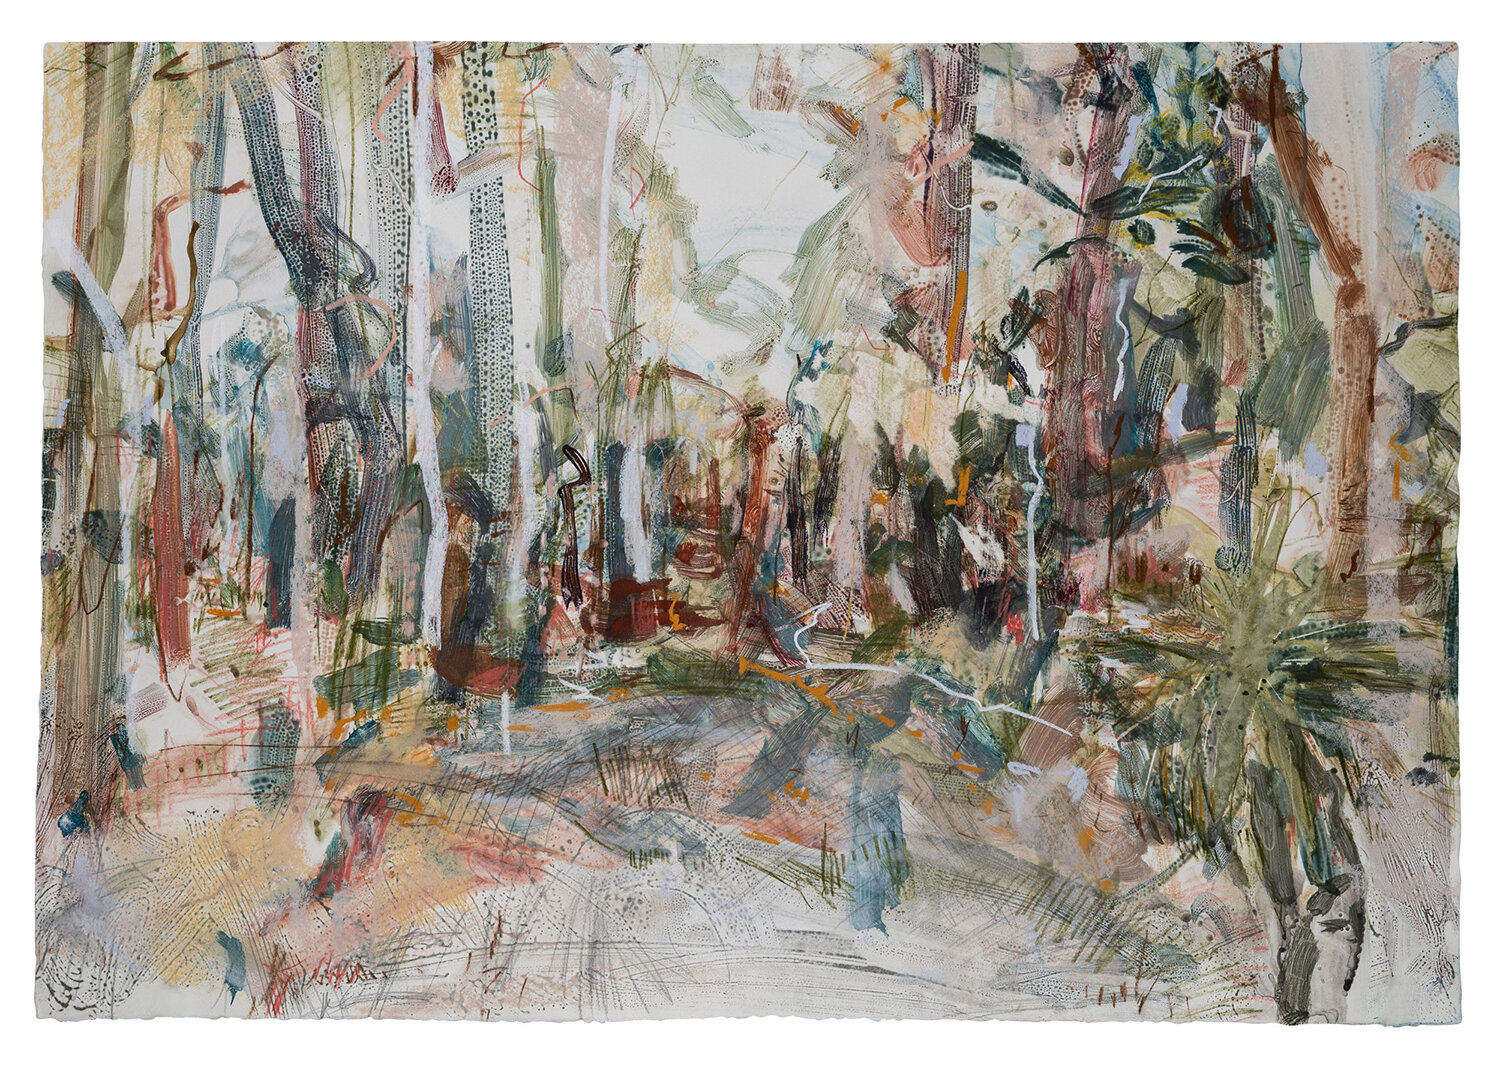   Boranup Forest No 8 , 2021, 75 x 97 cm watercolour monoprint with pastel and pencil on paper  Collected 